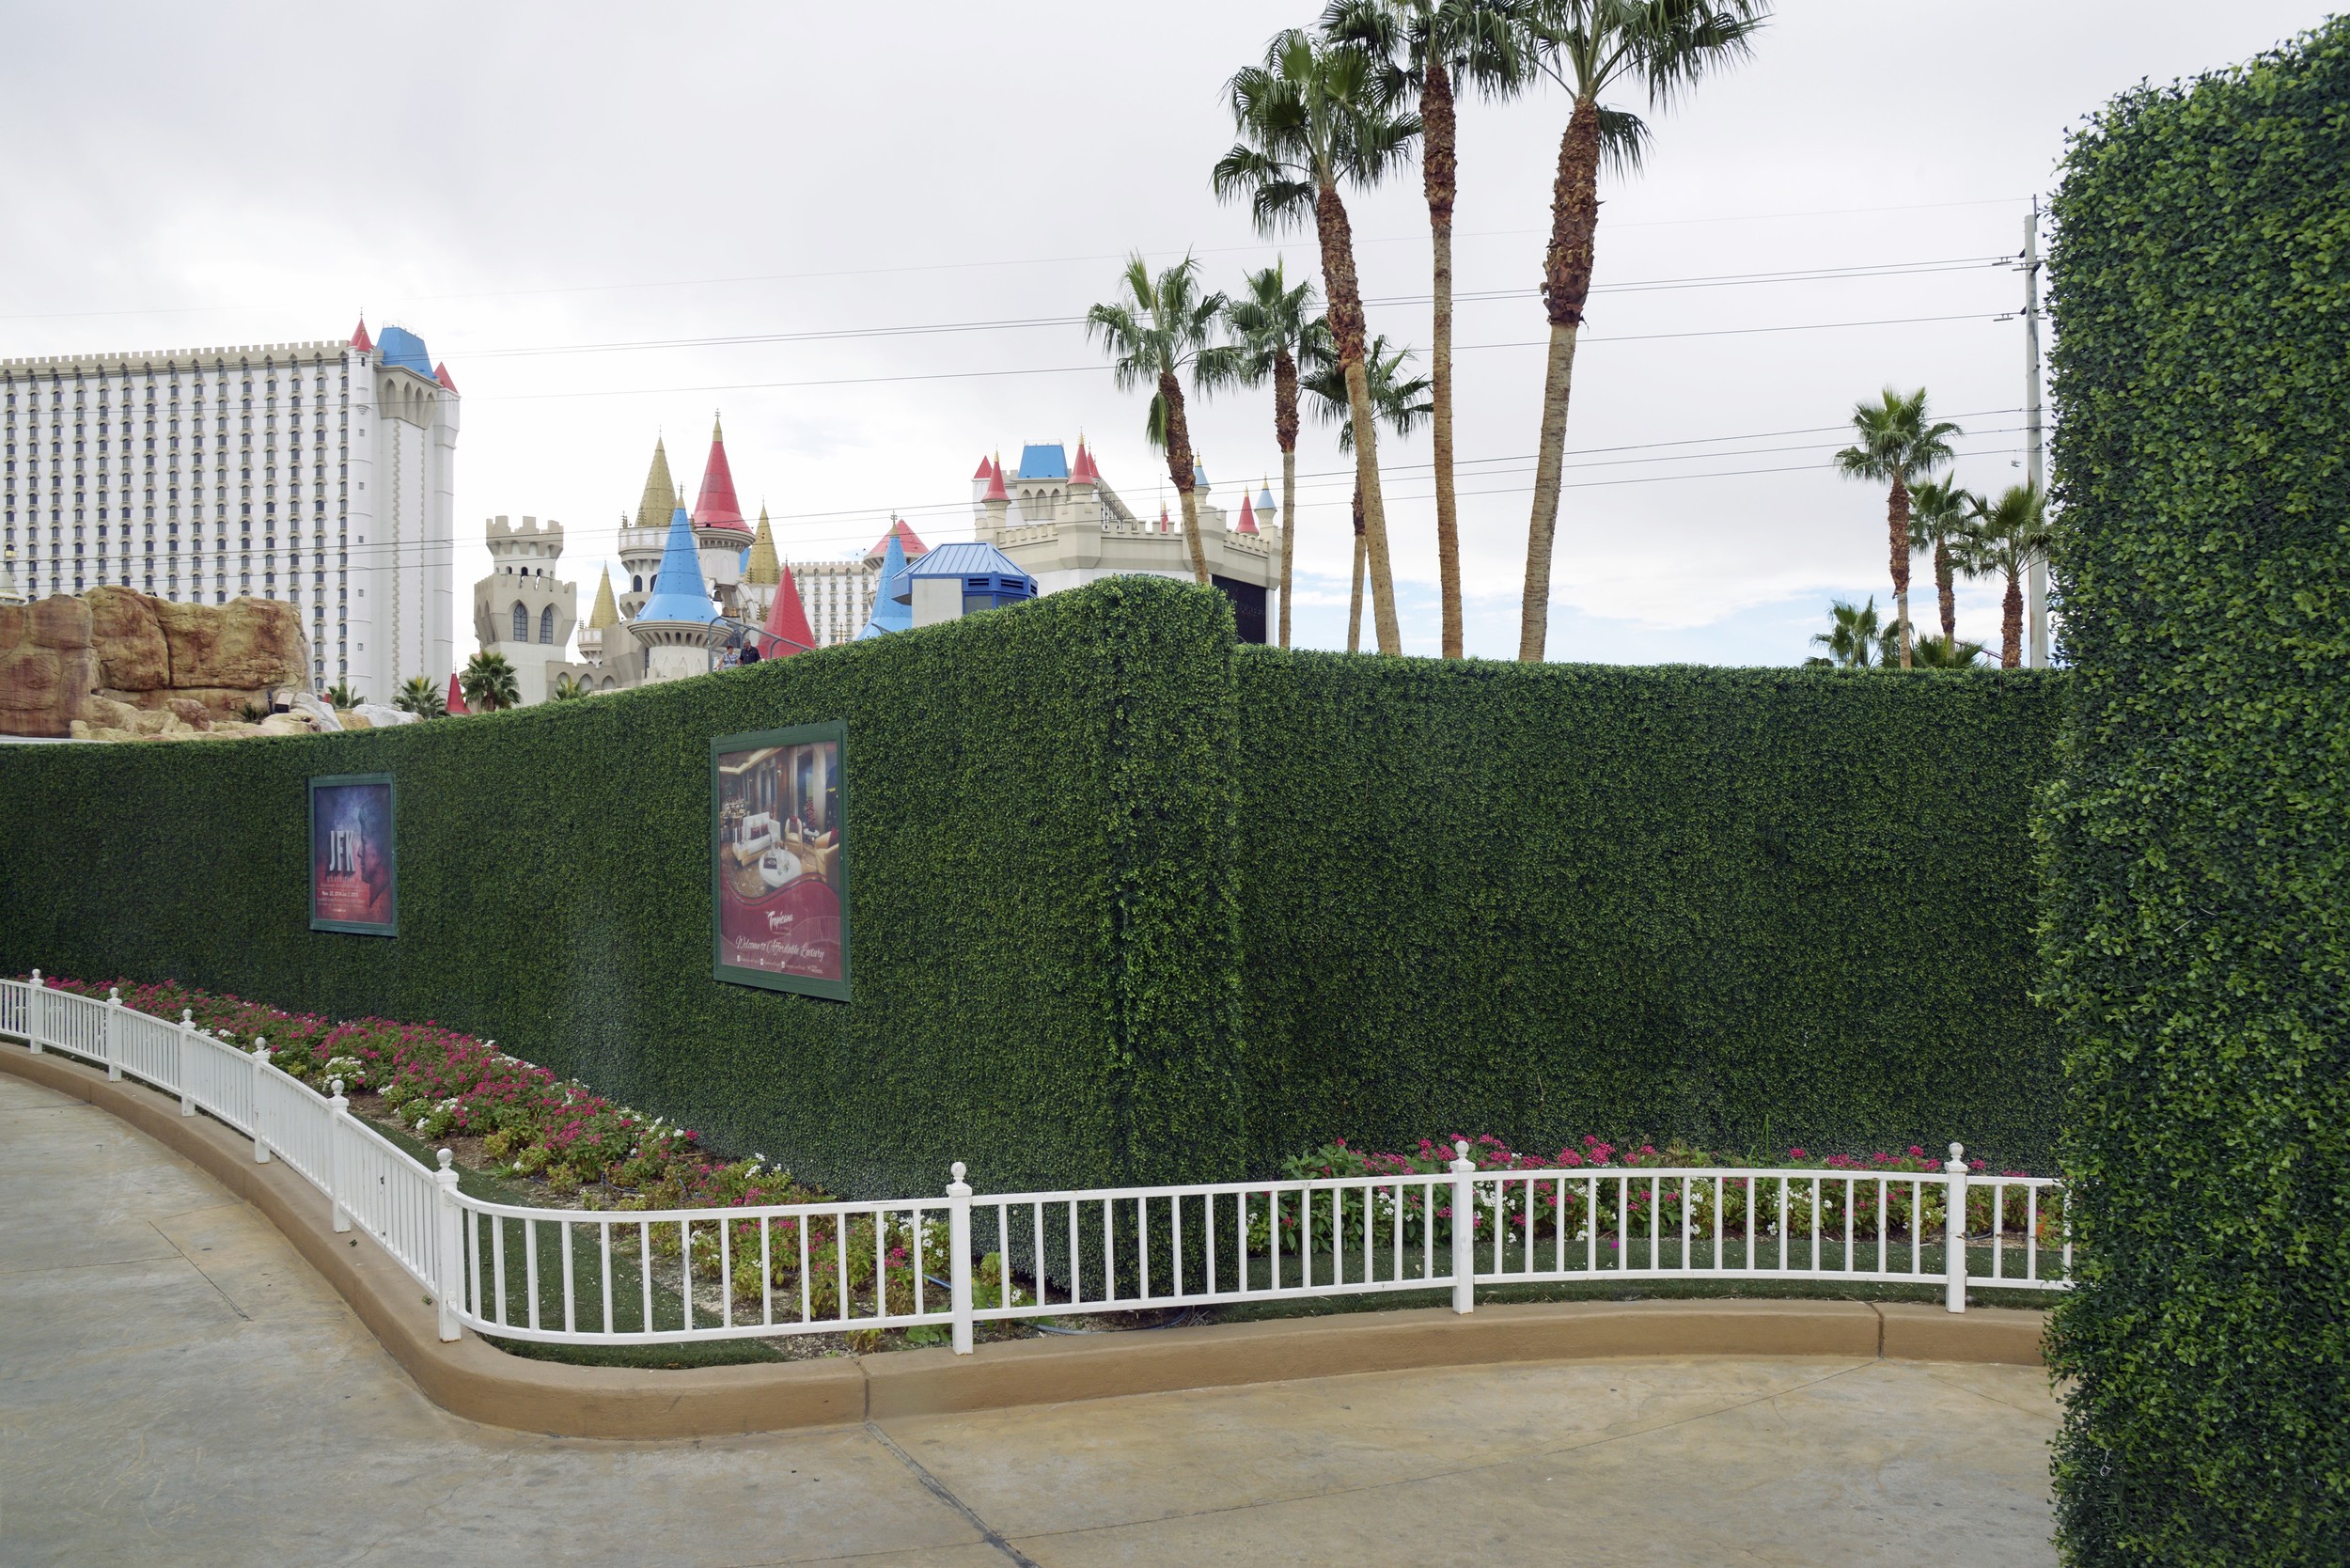   Artificial Hedge and Excalibur Hotel,   2014   